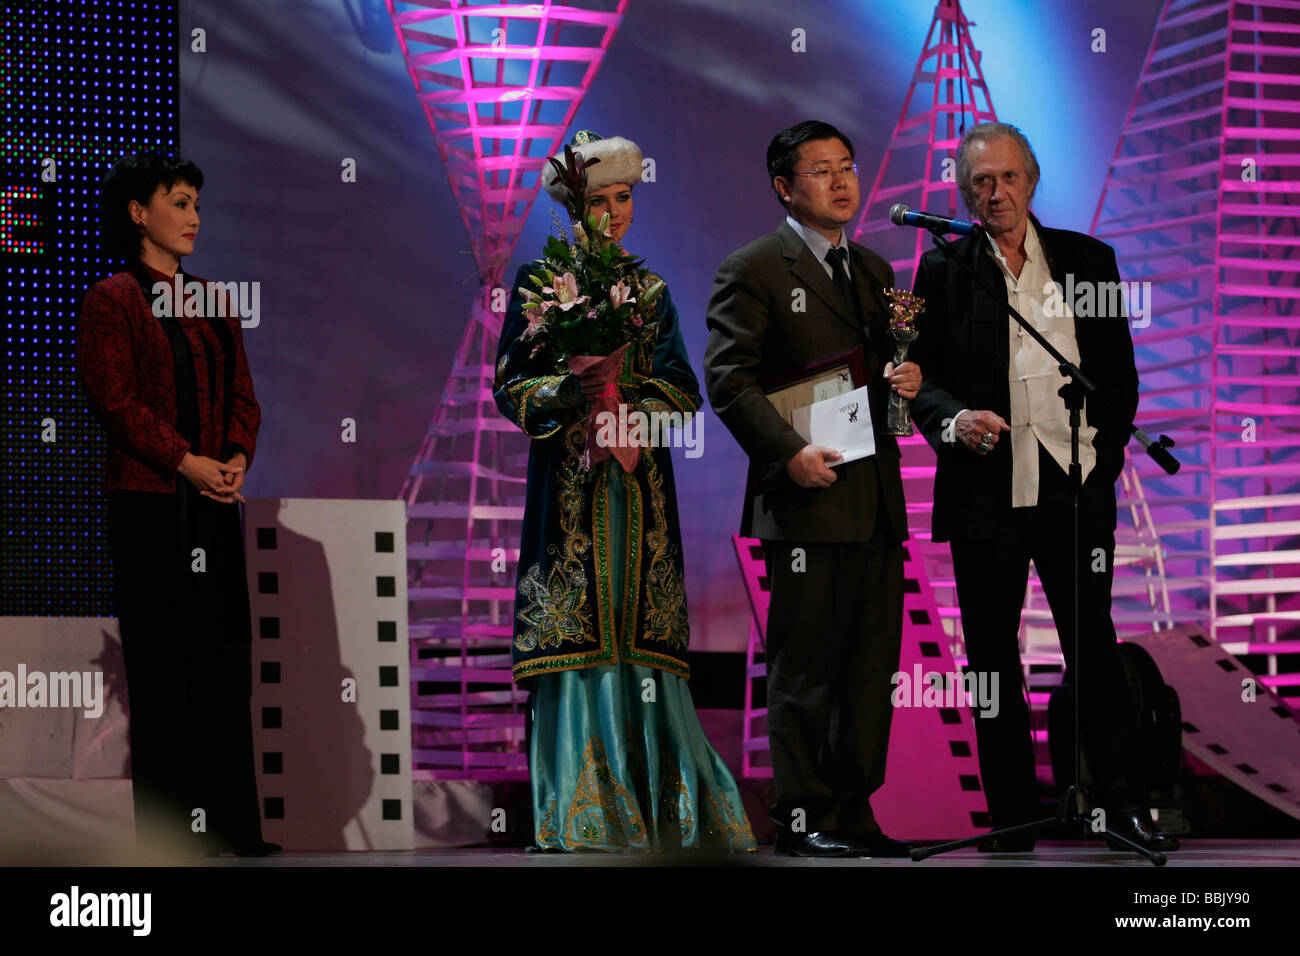 Hollywood star actor David Carradine (right) at Eurasia film festival in Almaty, Kazakhstan, the biggest film show and contest in Central Asia Stock Photo